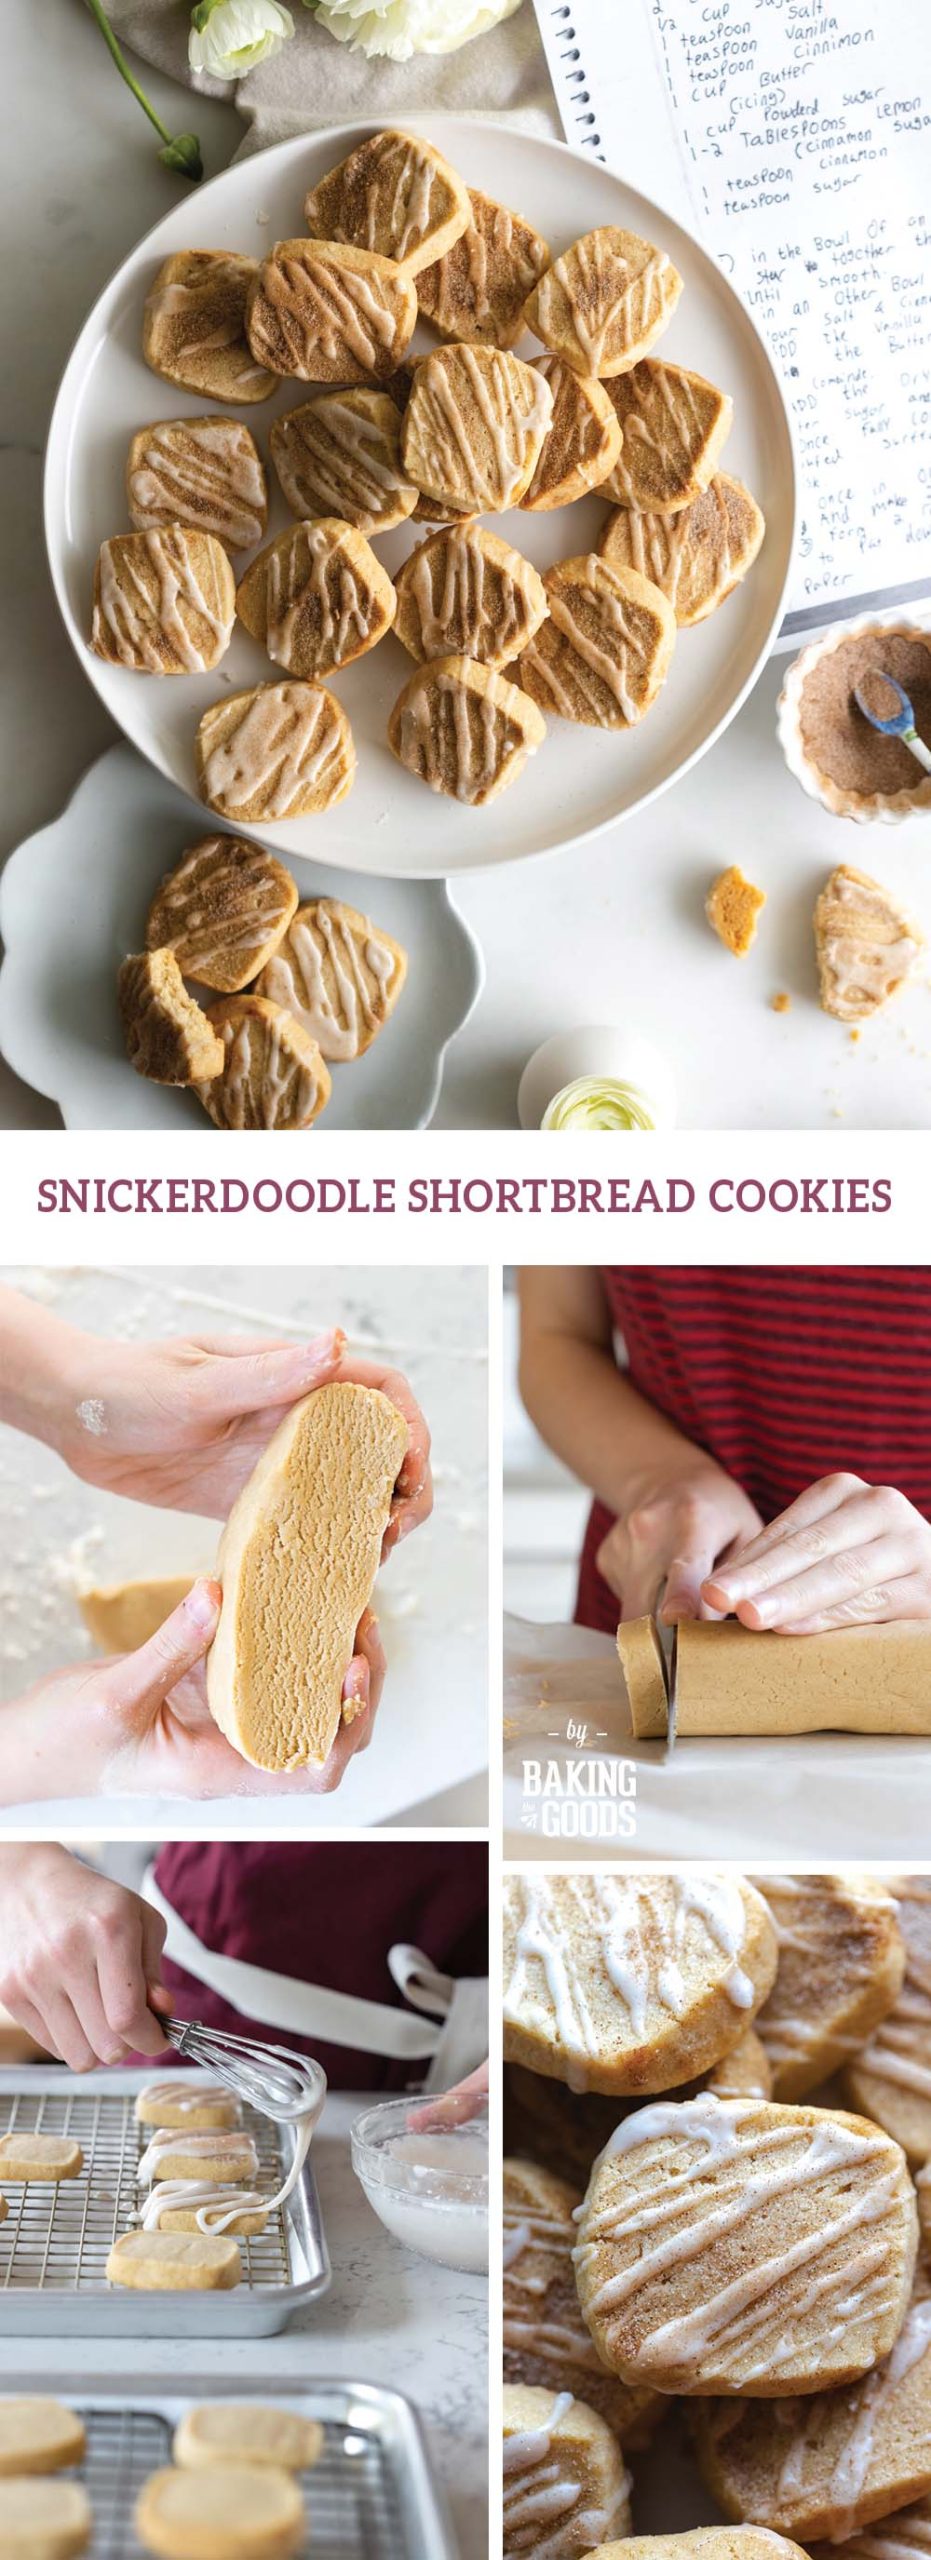 Snickerdoodle Shortbread-Cookies by Baking The Goods